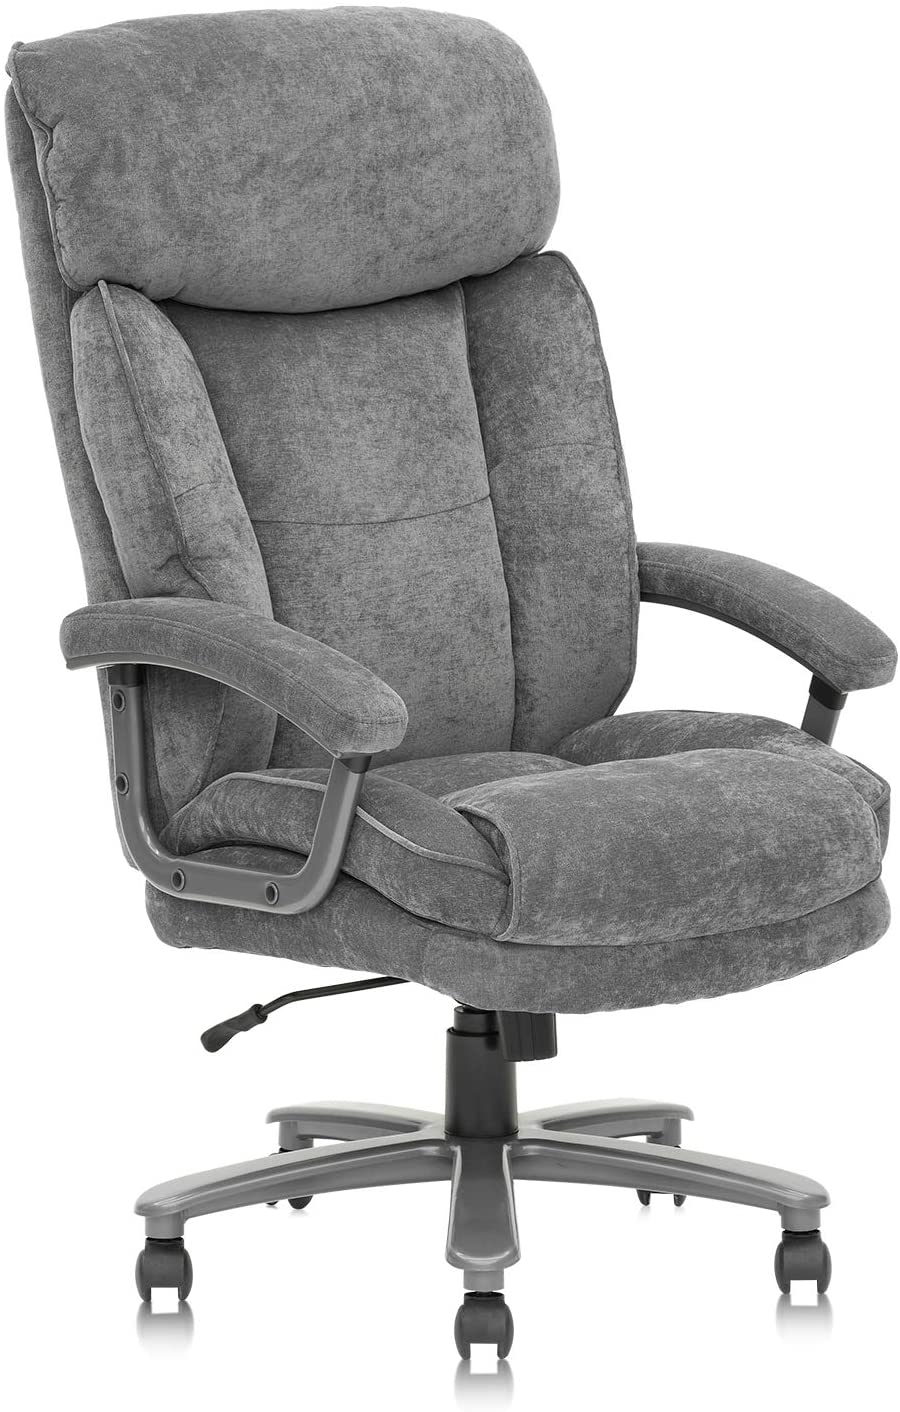 CLATINA Rolling Extra Large Executive Desk Chair